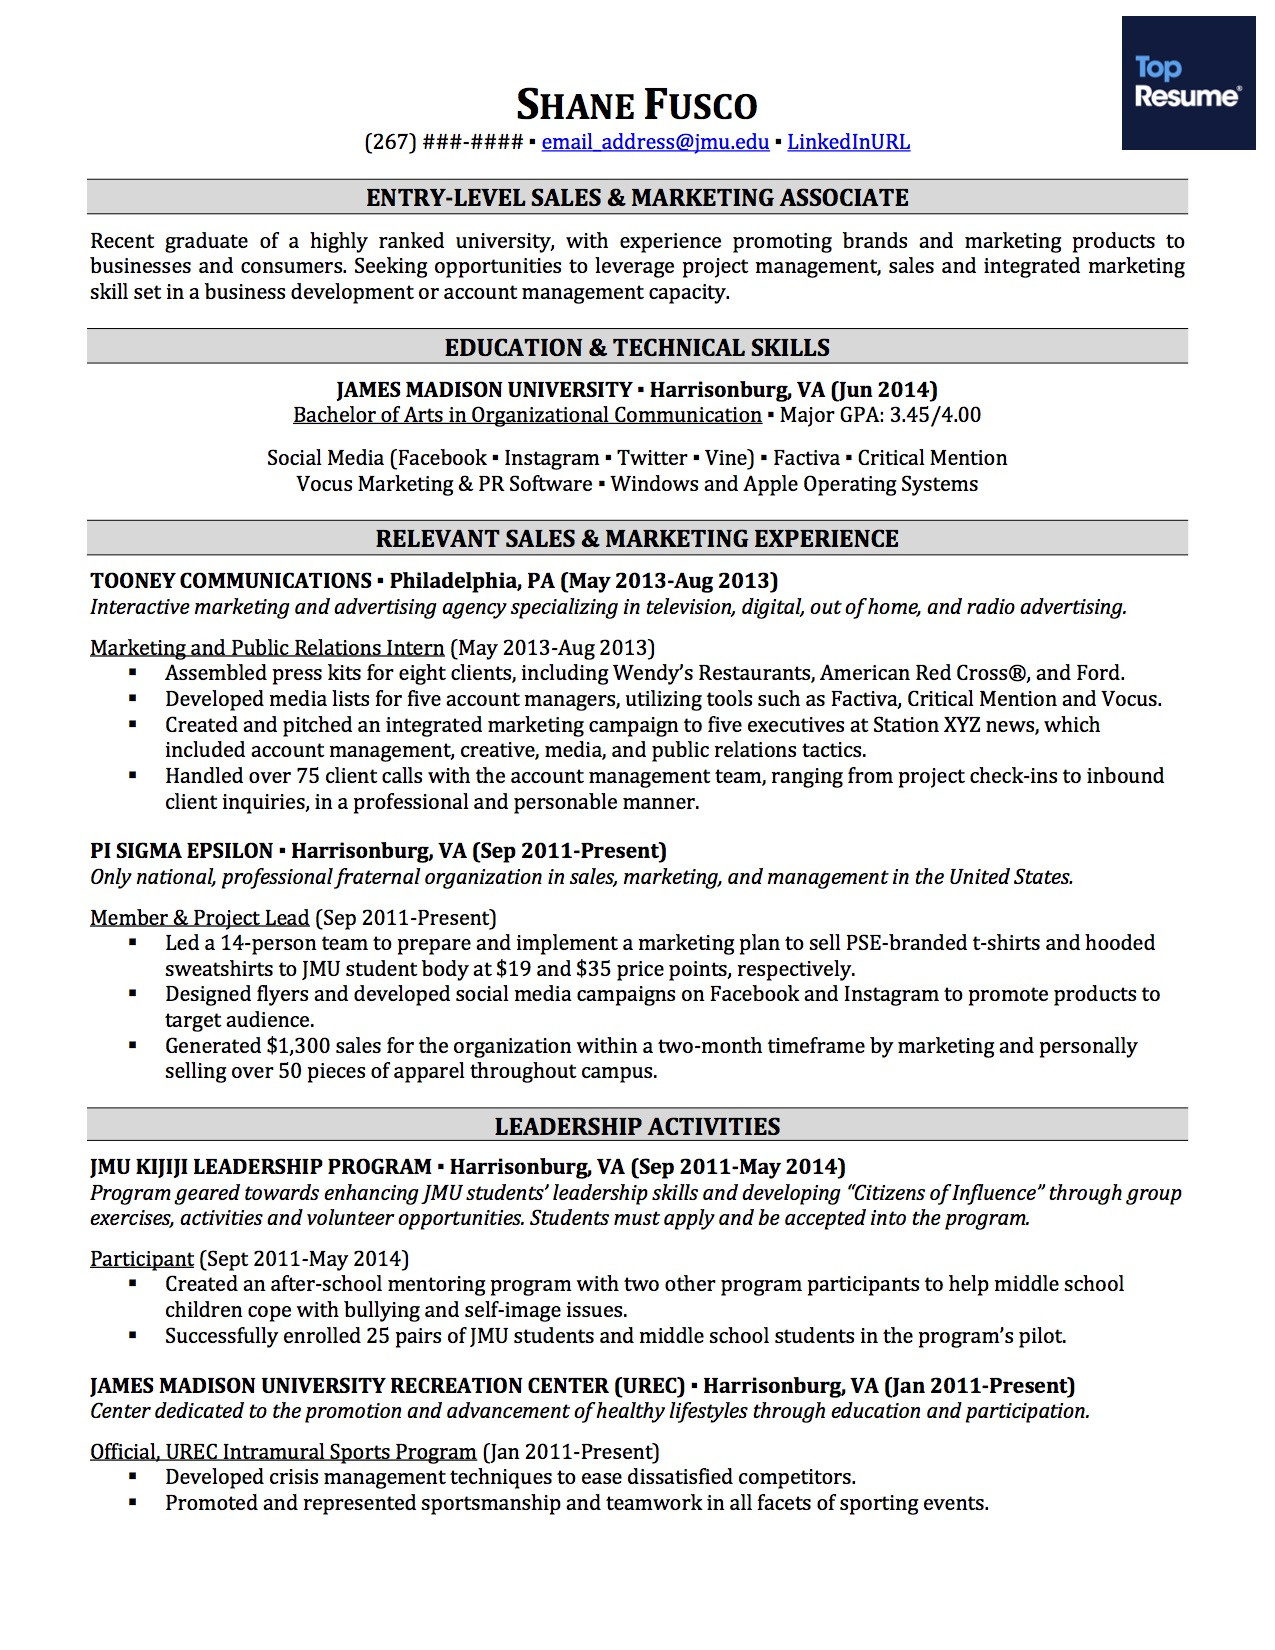 Sample Resume Right Out Of College How to Make A Great Resume with No Experience topresume